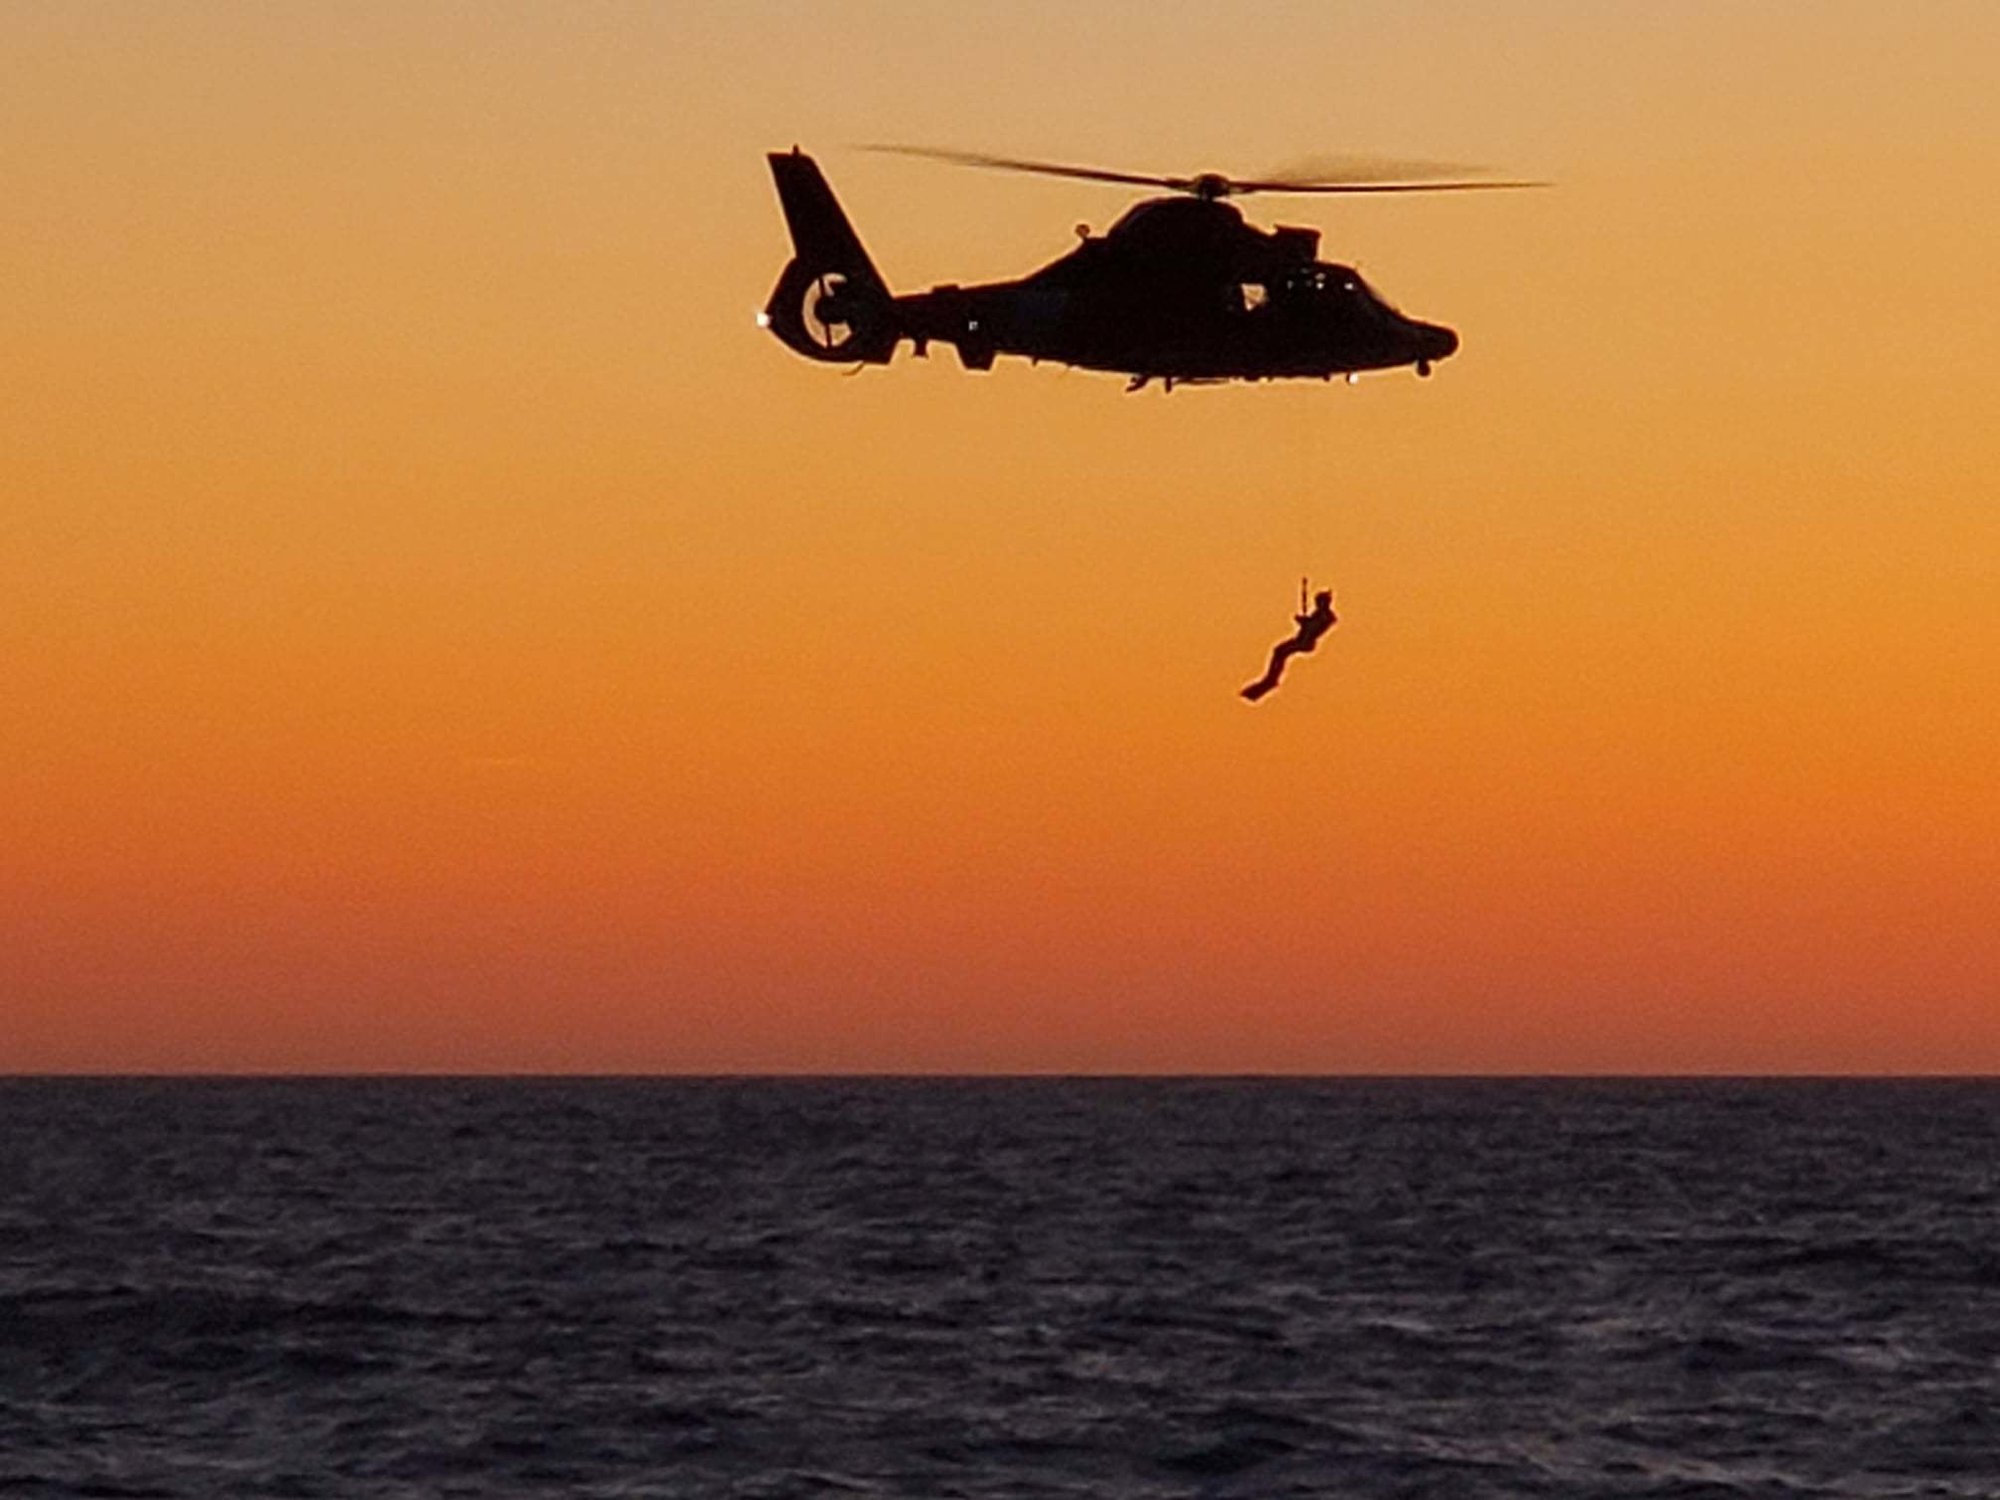 A Coast Guard rescue swimmer is hoisted into a Coast Guard Sector  North Bend MH-65D Dolphin helicopter during training near Newport, Oregon, April 30, 2019. New 5g cell phones may interfere with radar altimeters which pilots often rely on for hovering. US Coast Guard photo.